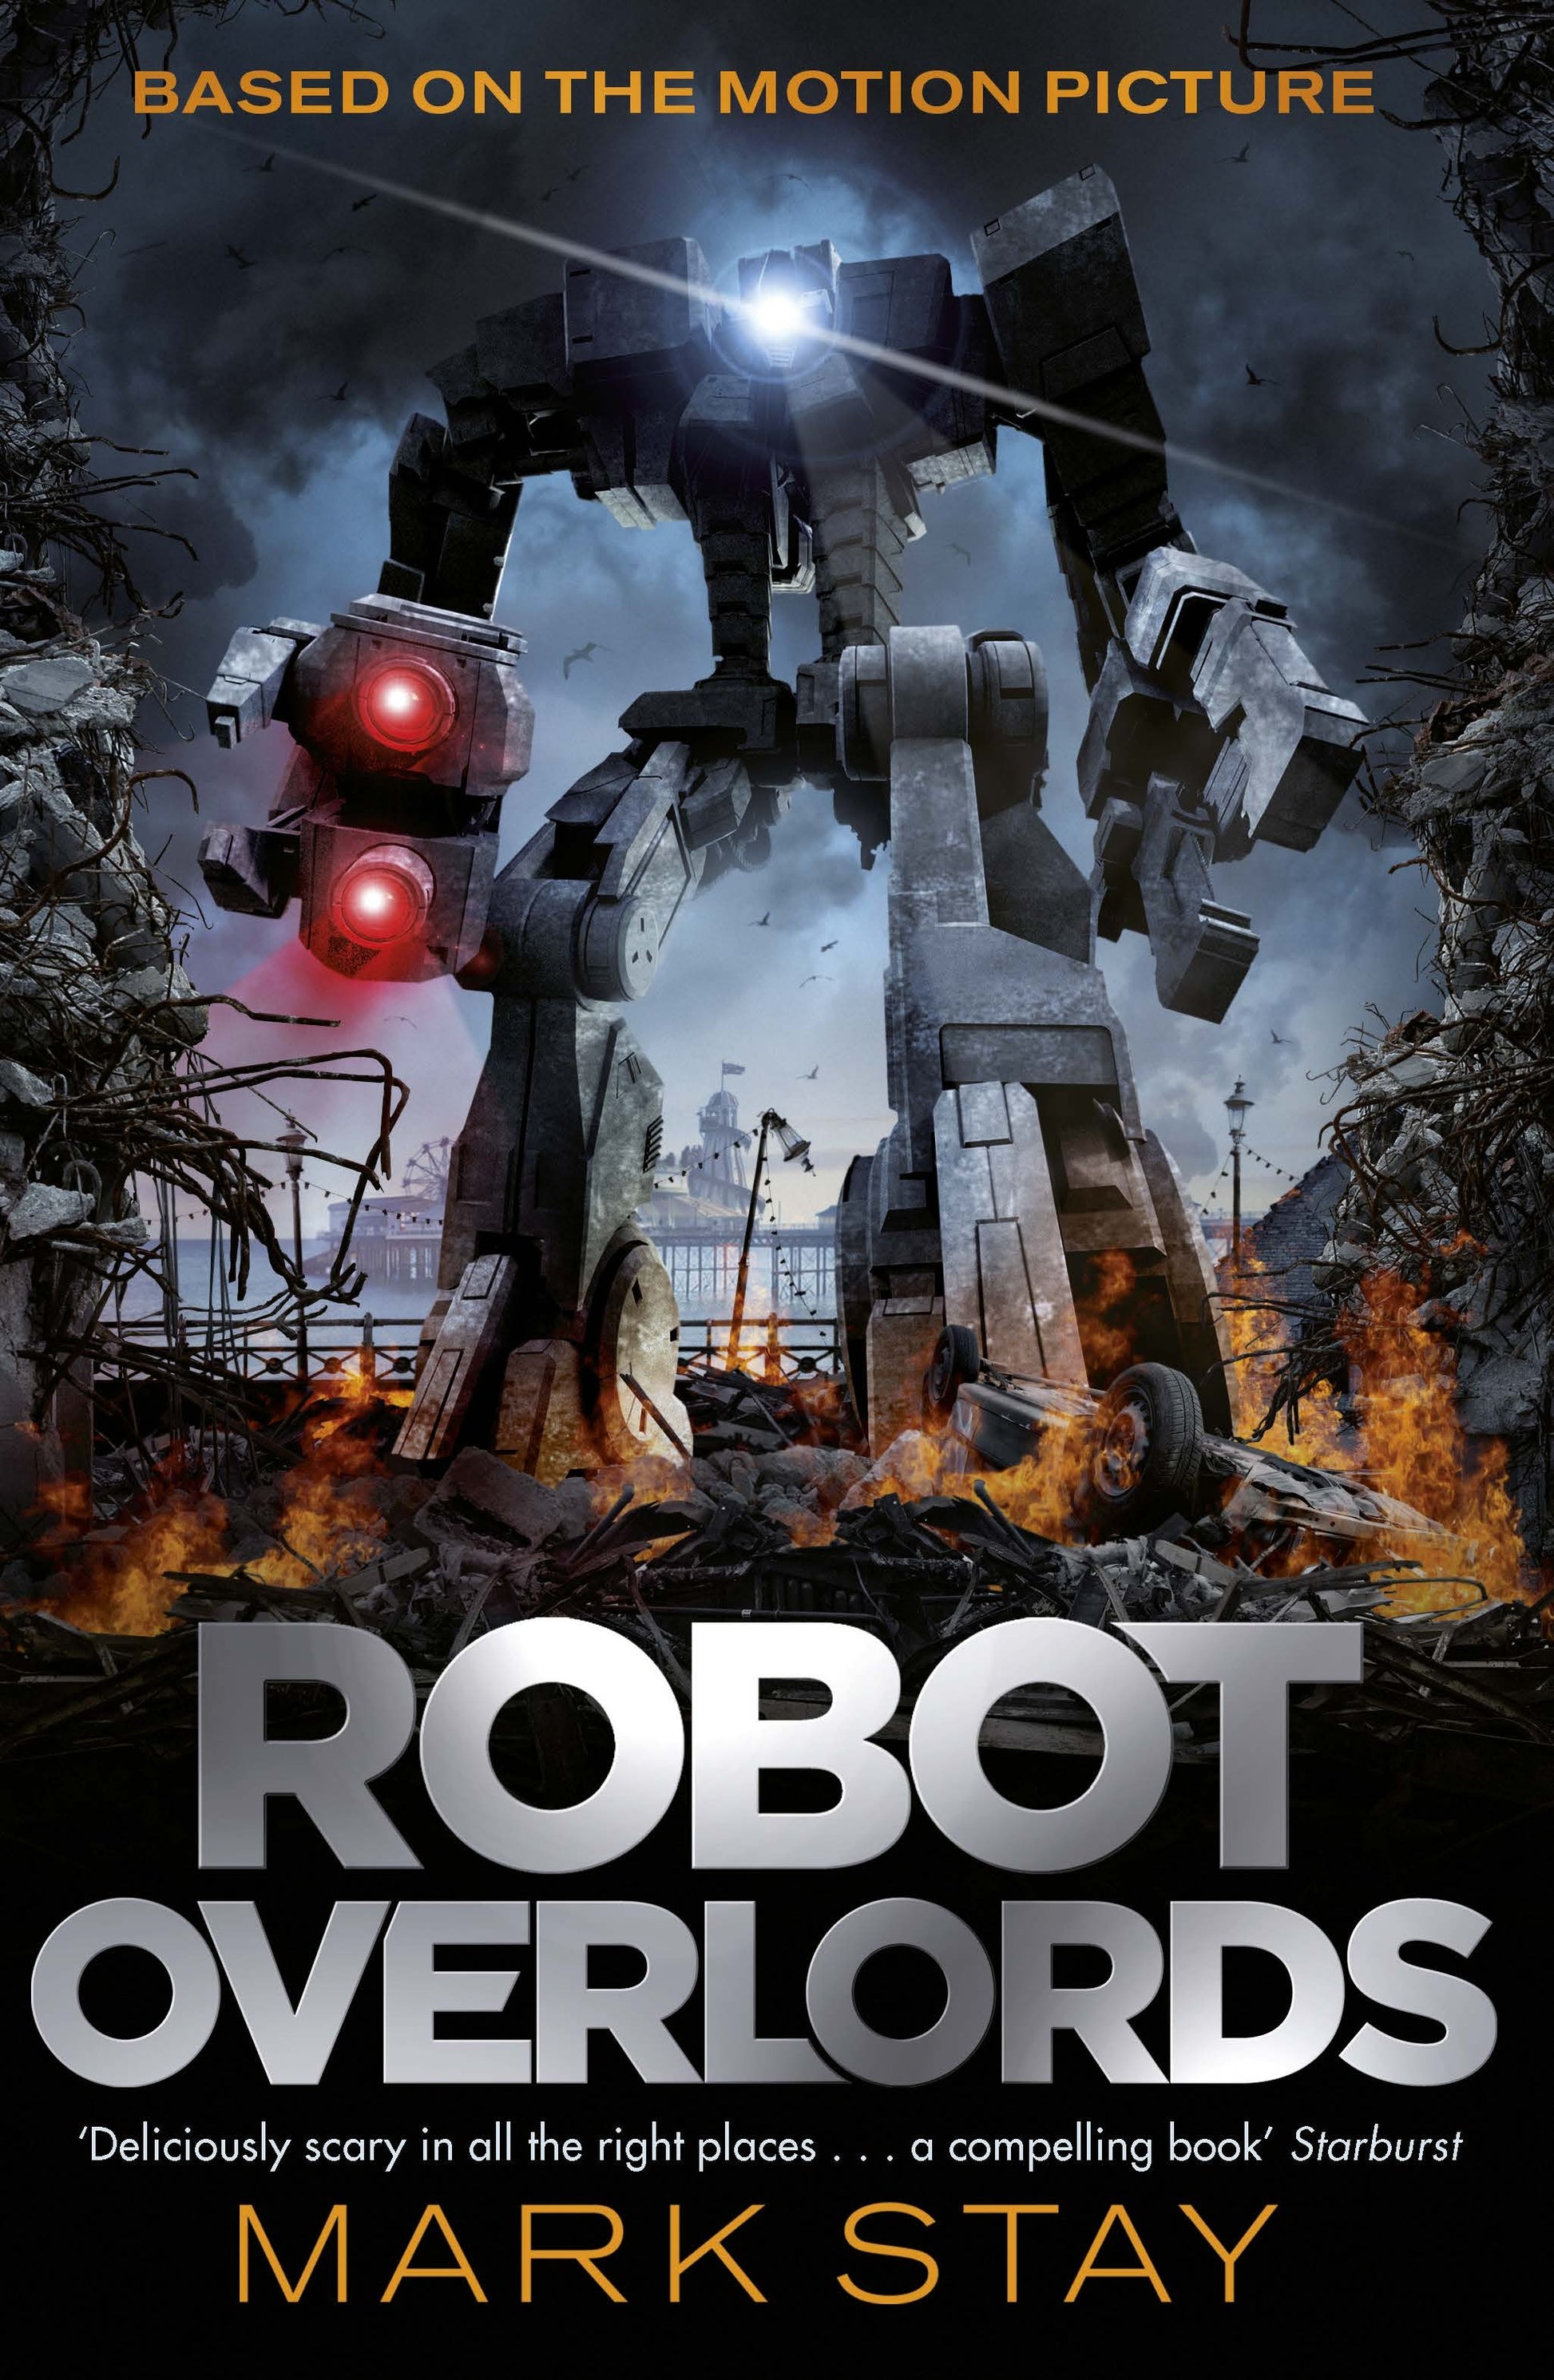 Robot Overlords by Mark Stay